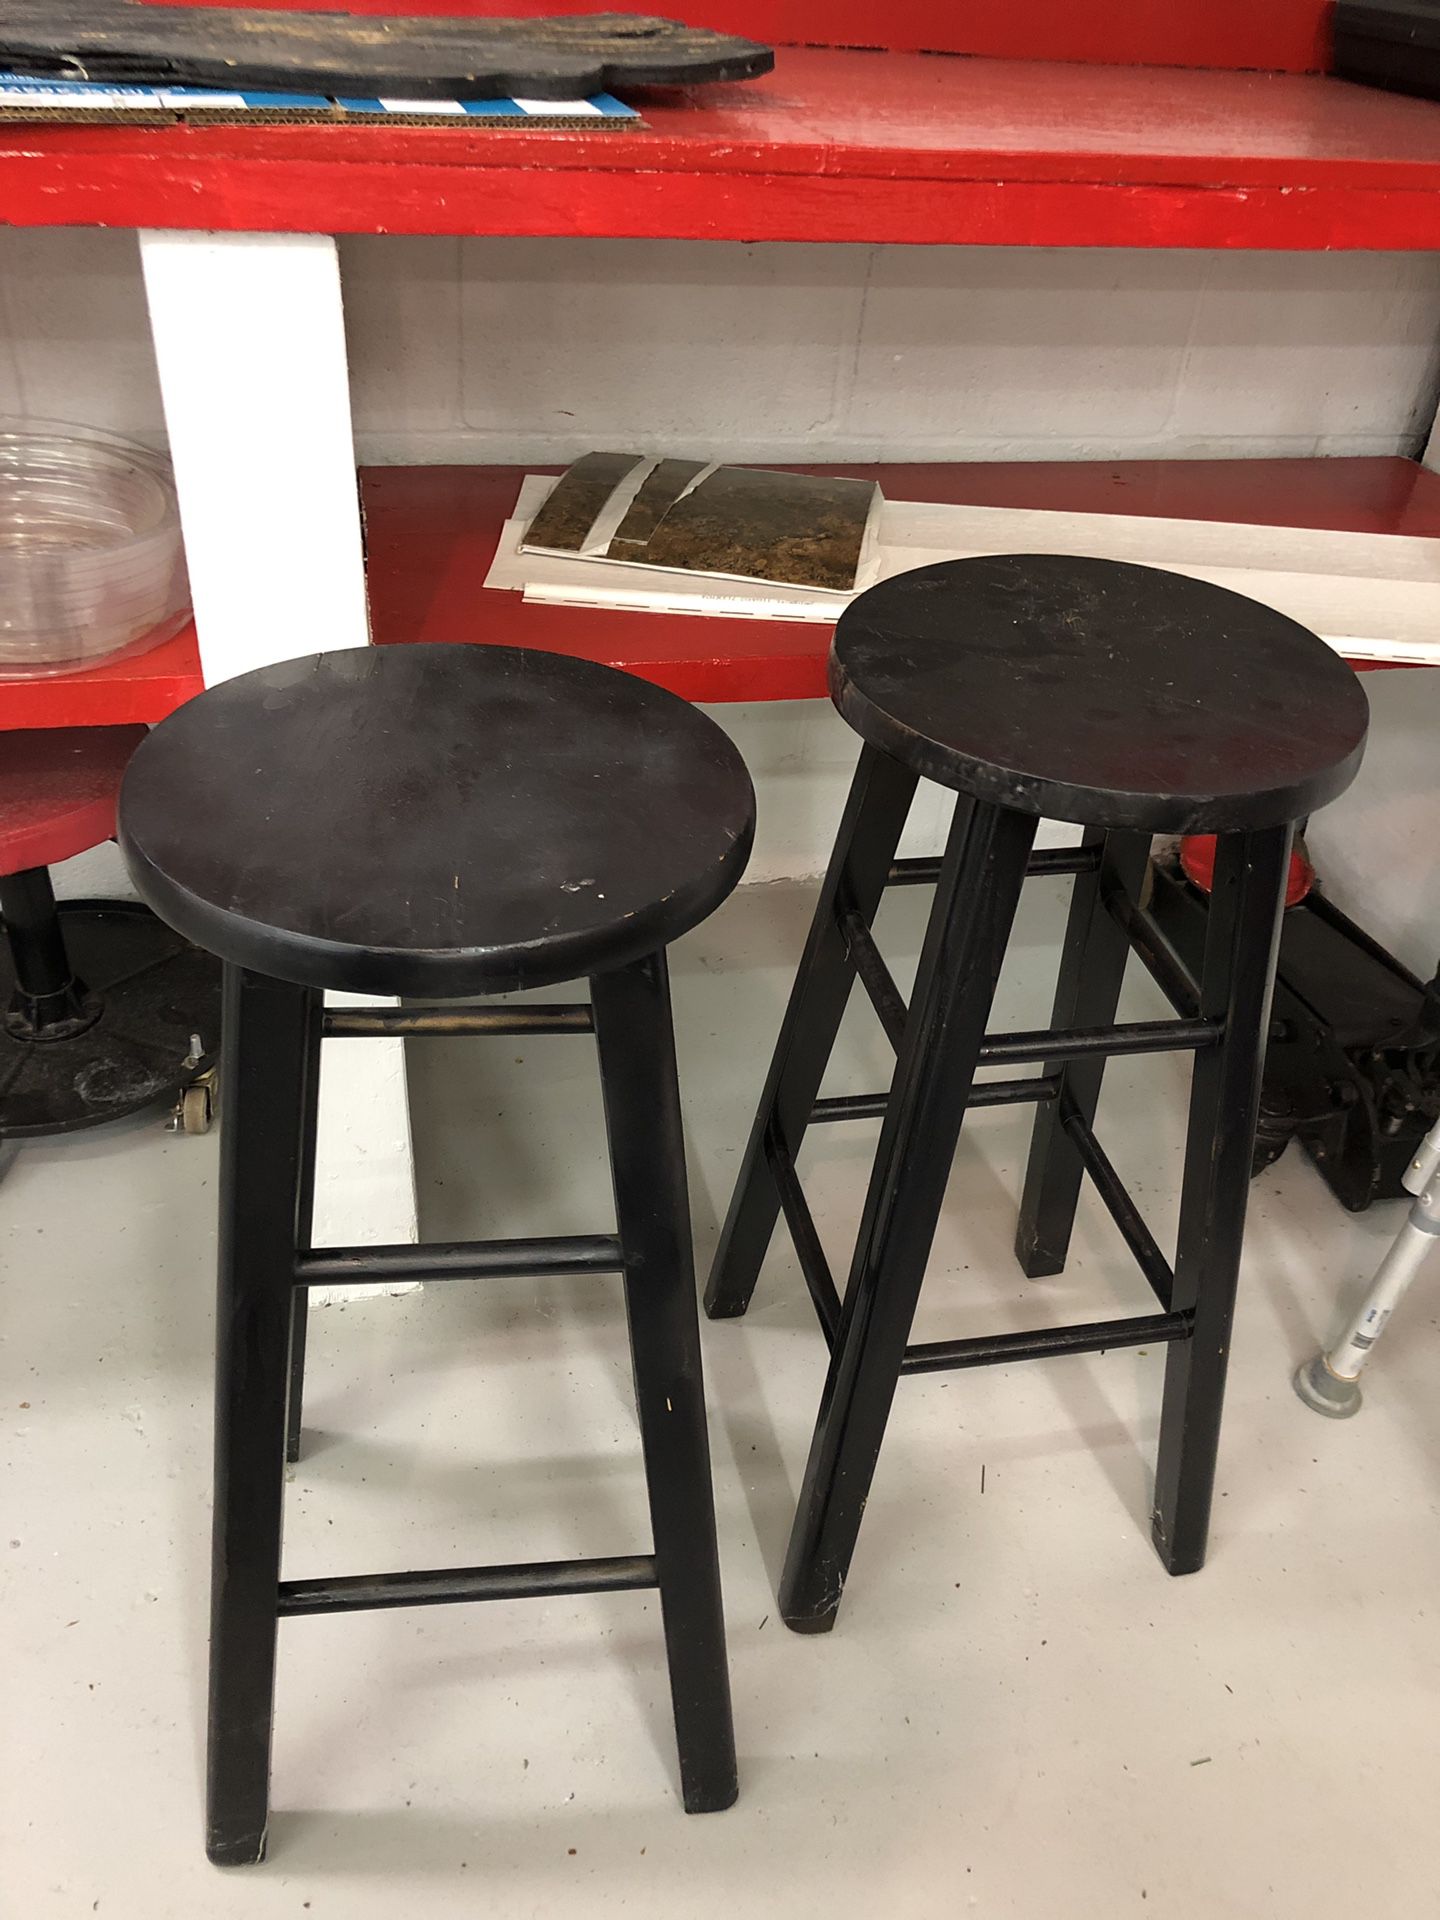 Two wooden stools